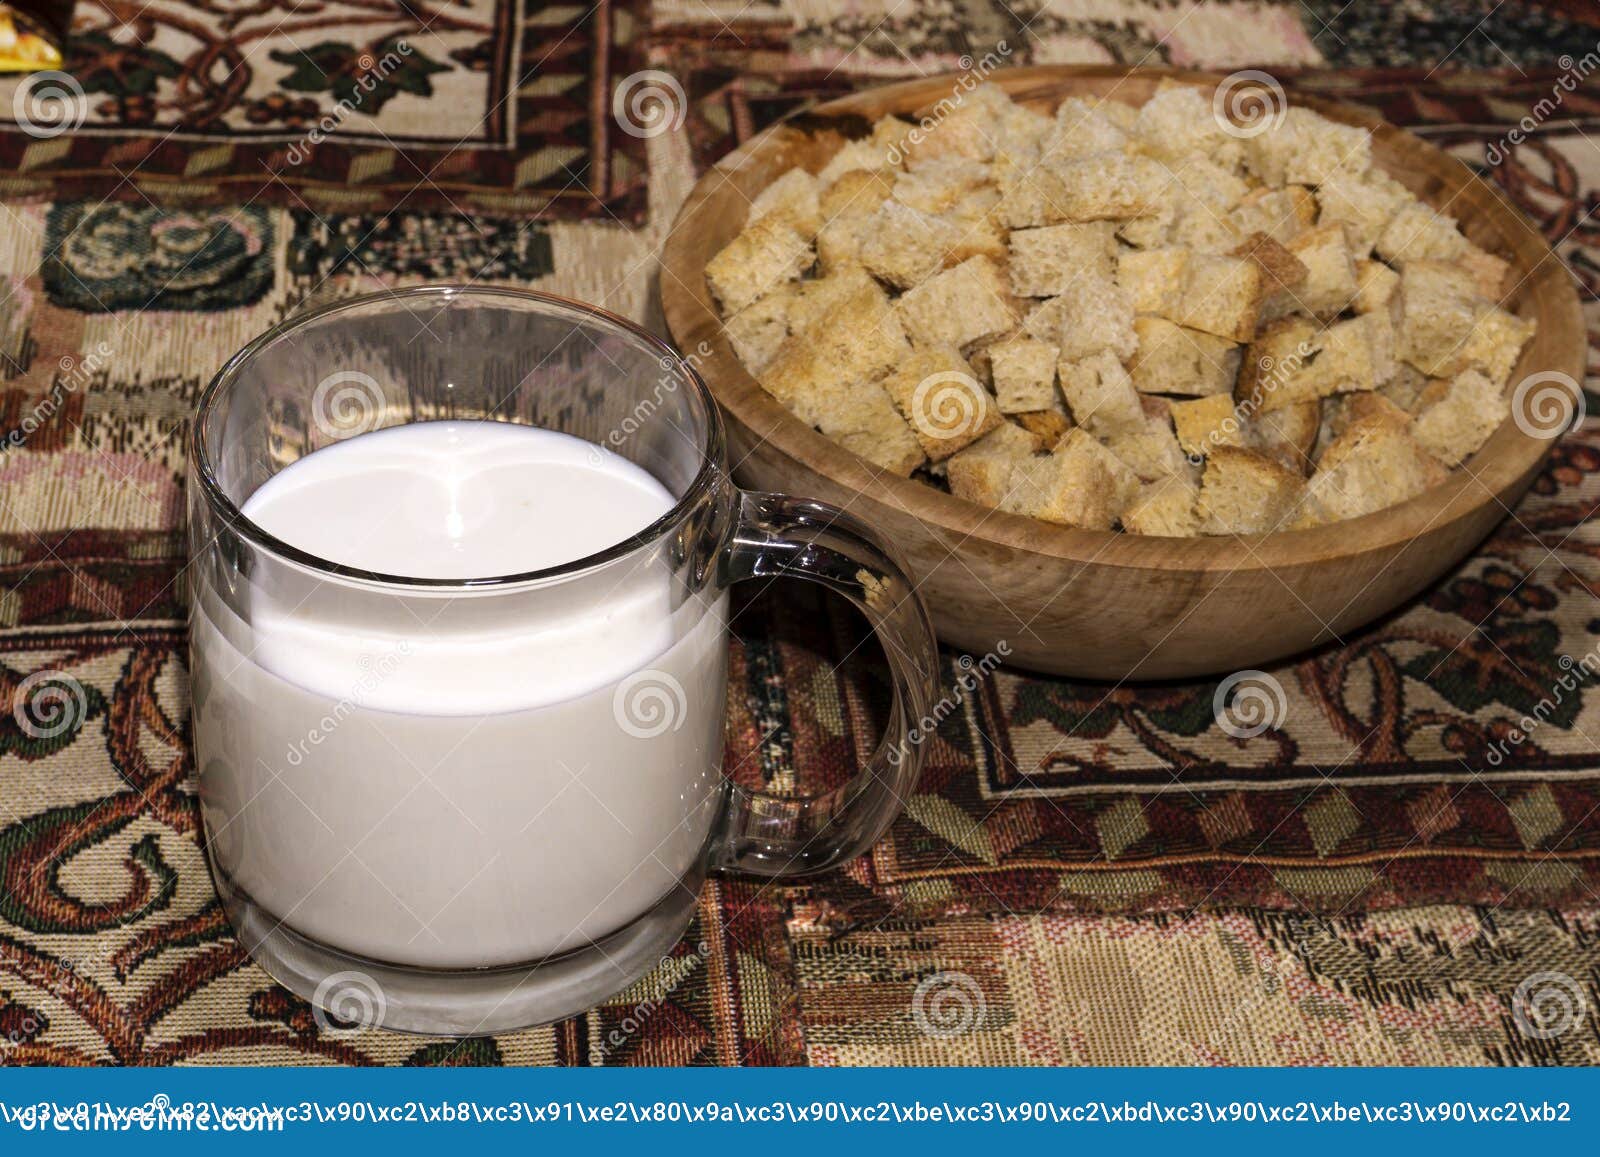 Mug With A Sour Milk Drink And A Wooden Bowl With Rusks Stock